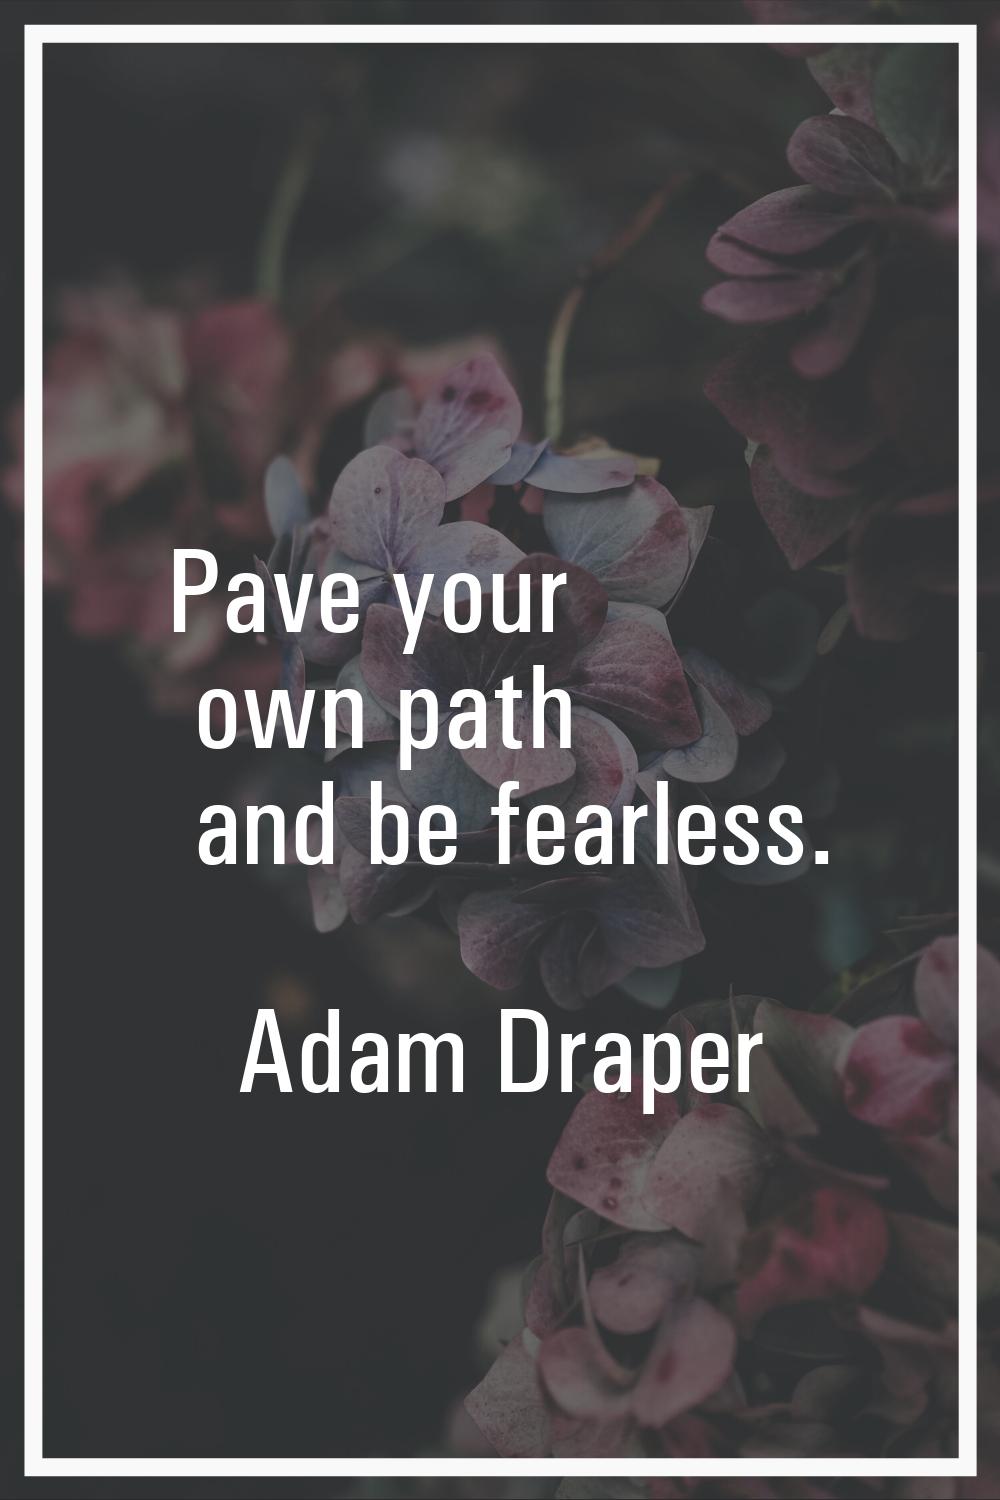 Pave your own path and be fearless.